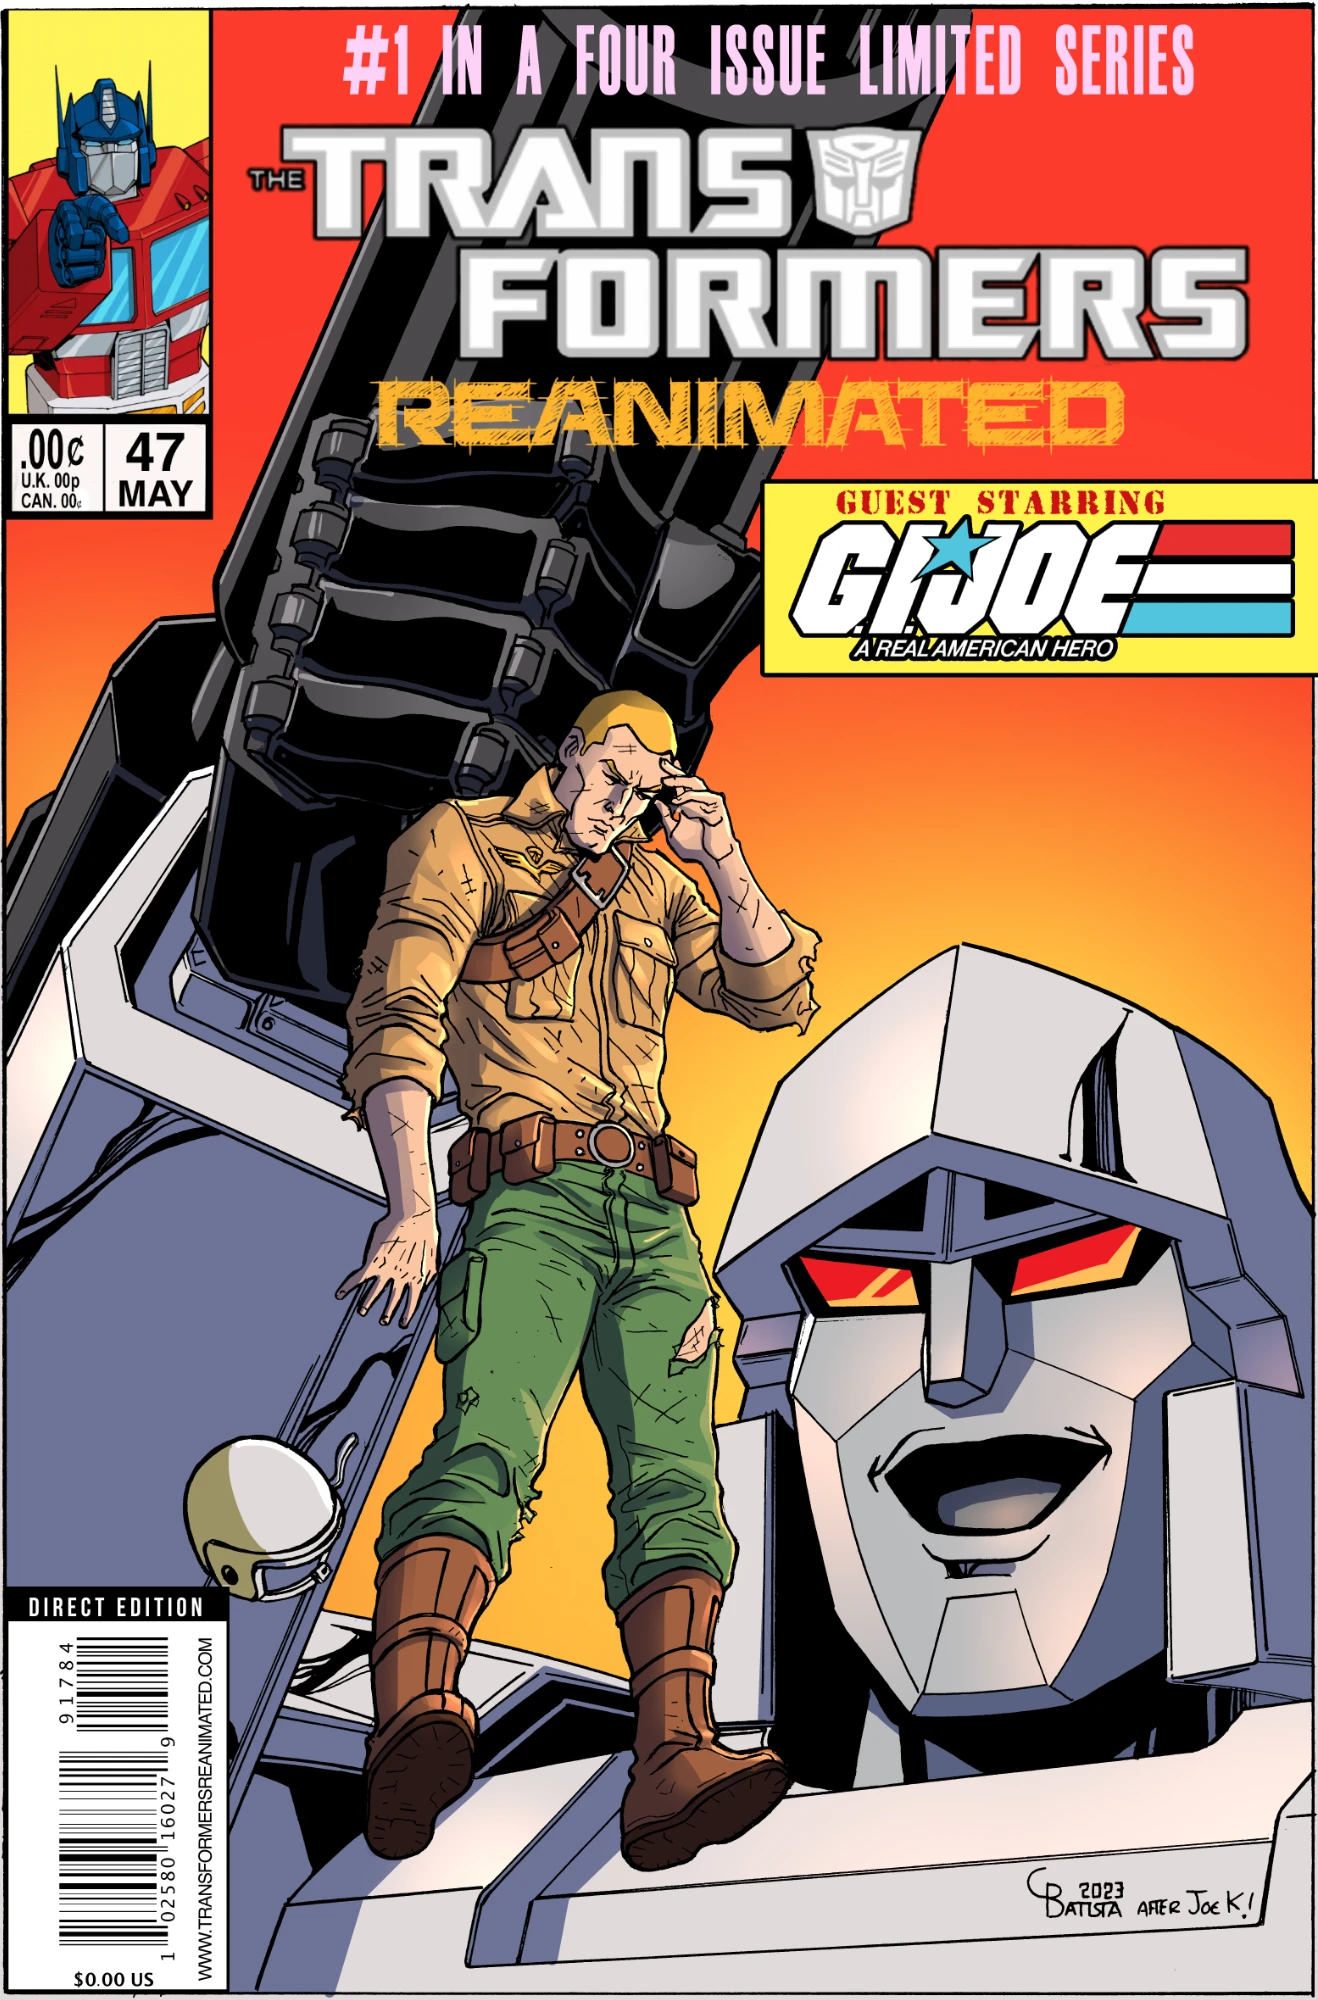 Transformers comic cover with Duke from G.I. Joe behind held up high by Megatron